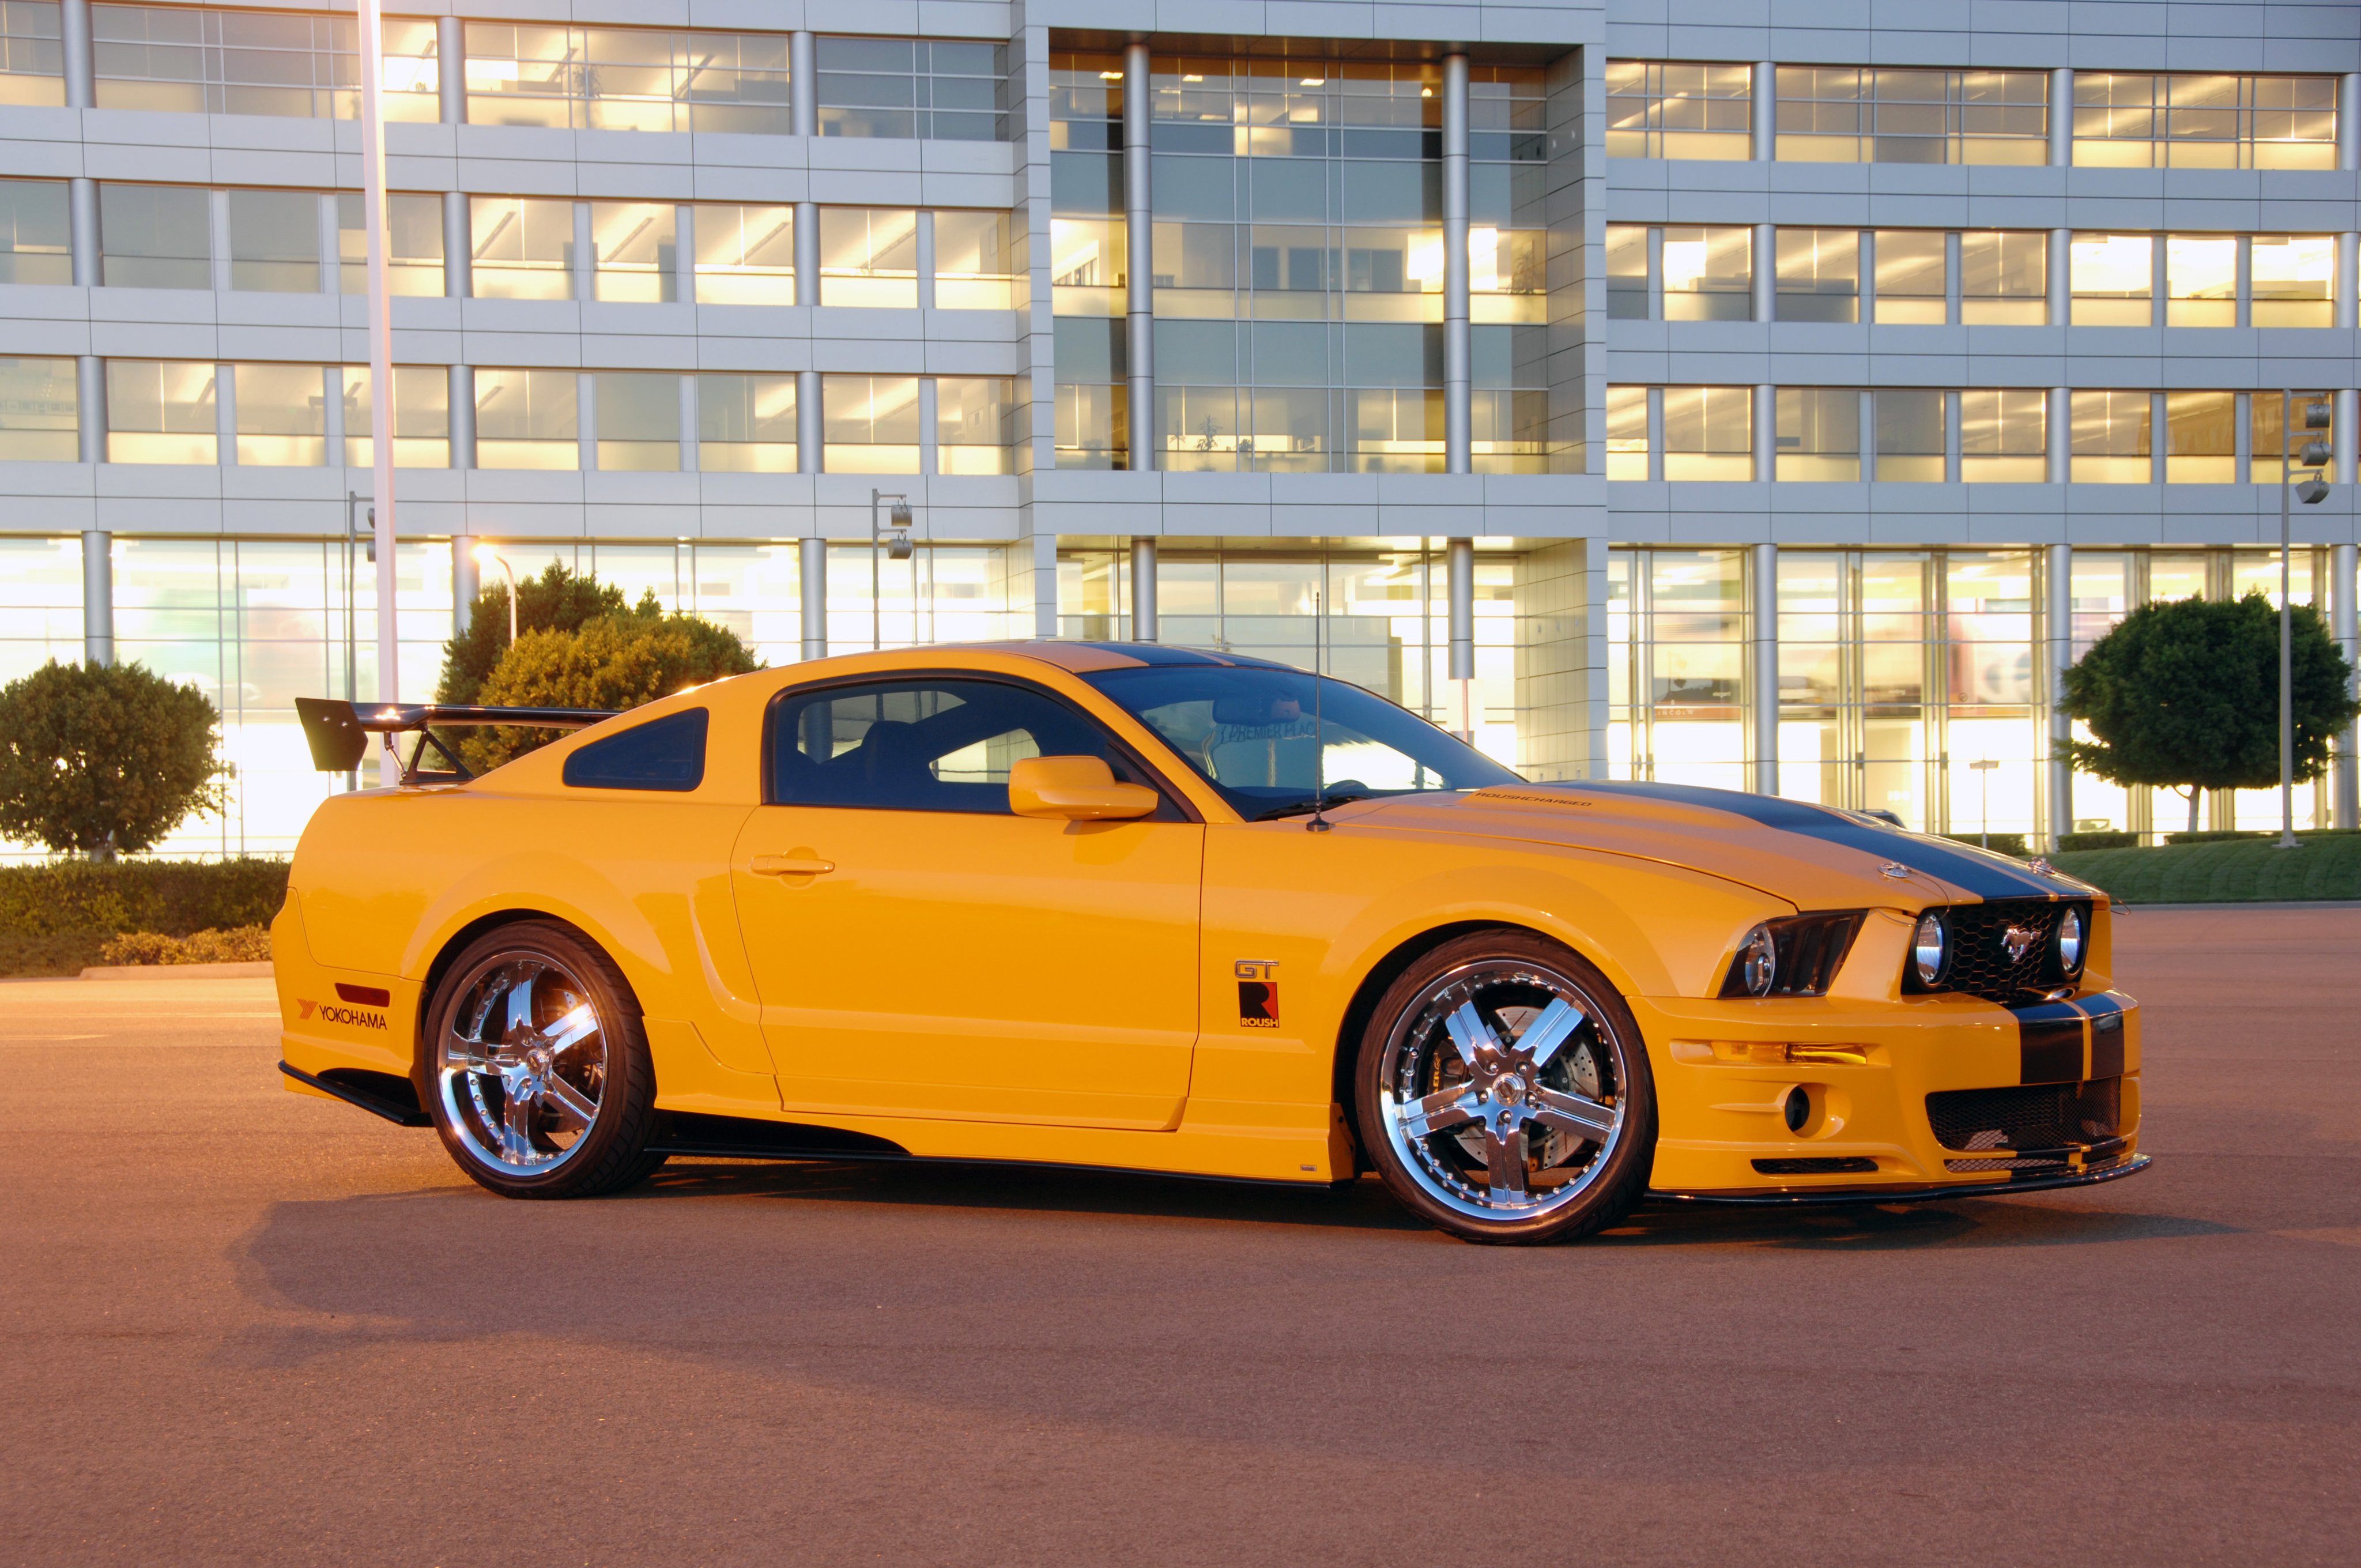 roush, Stage 3, 2006, Ford, Mustang, Modified, Convertible, Cars Wallpaper